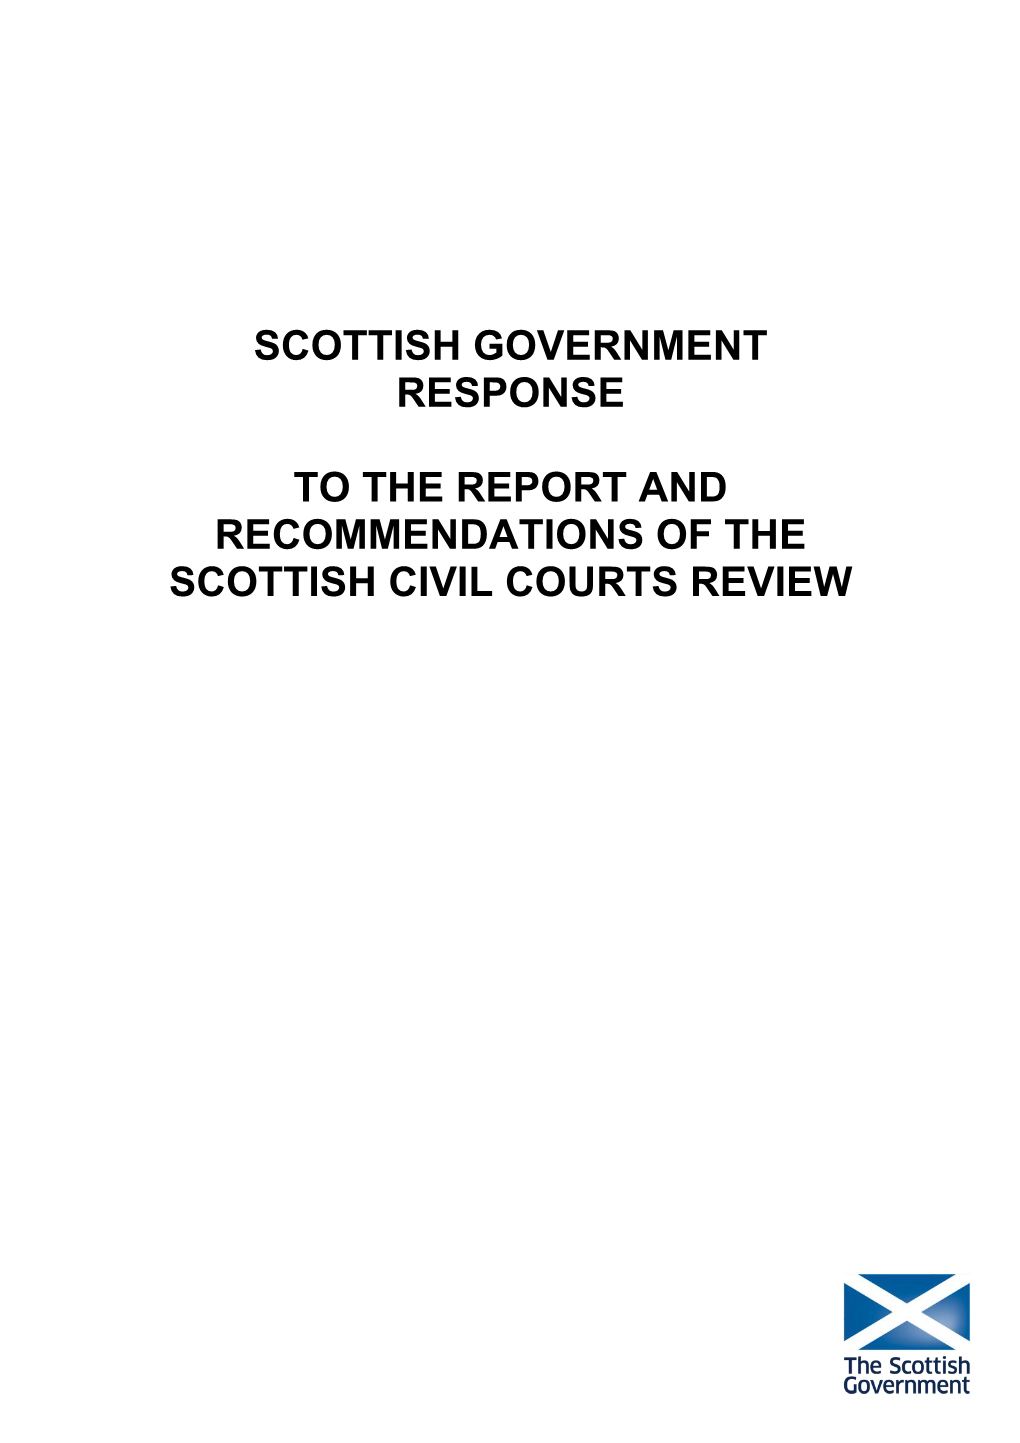 Scottish Government Response to the Report and Recommendations of The